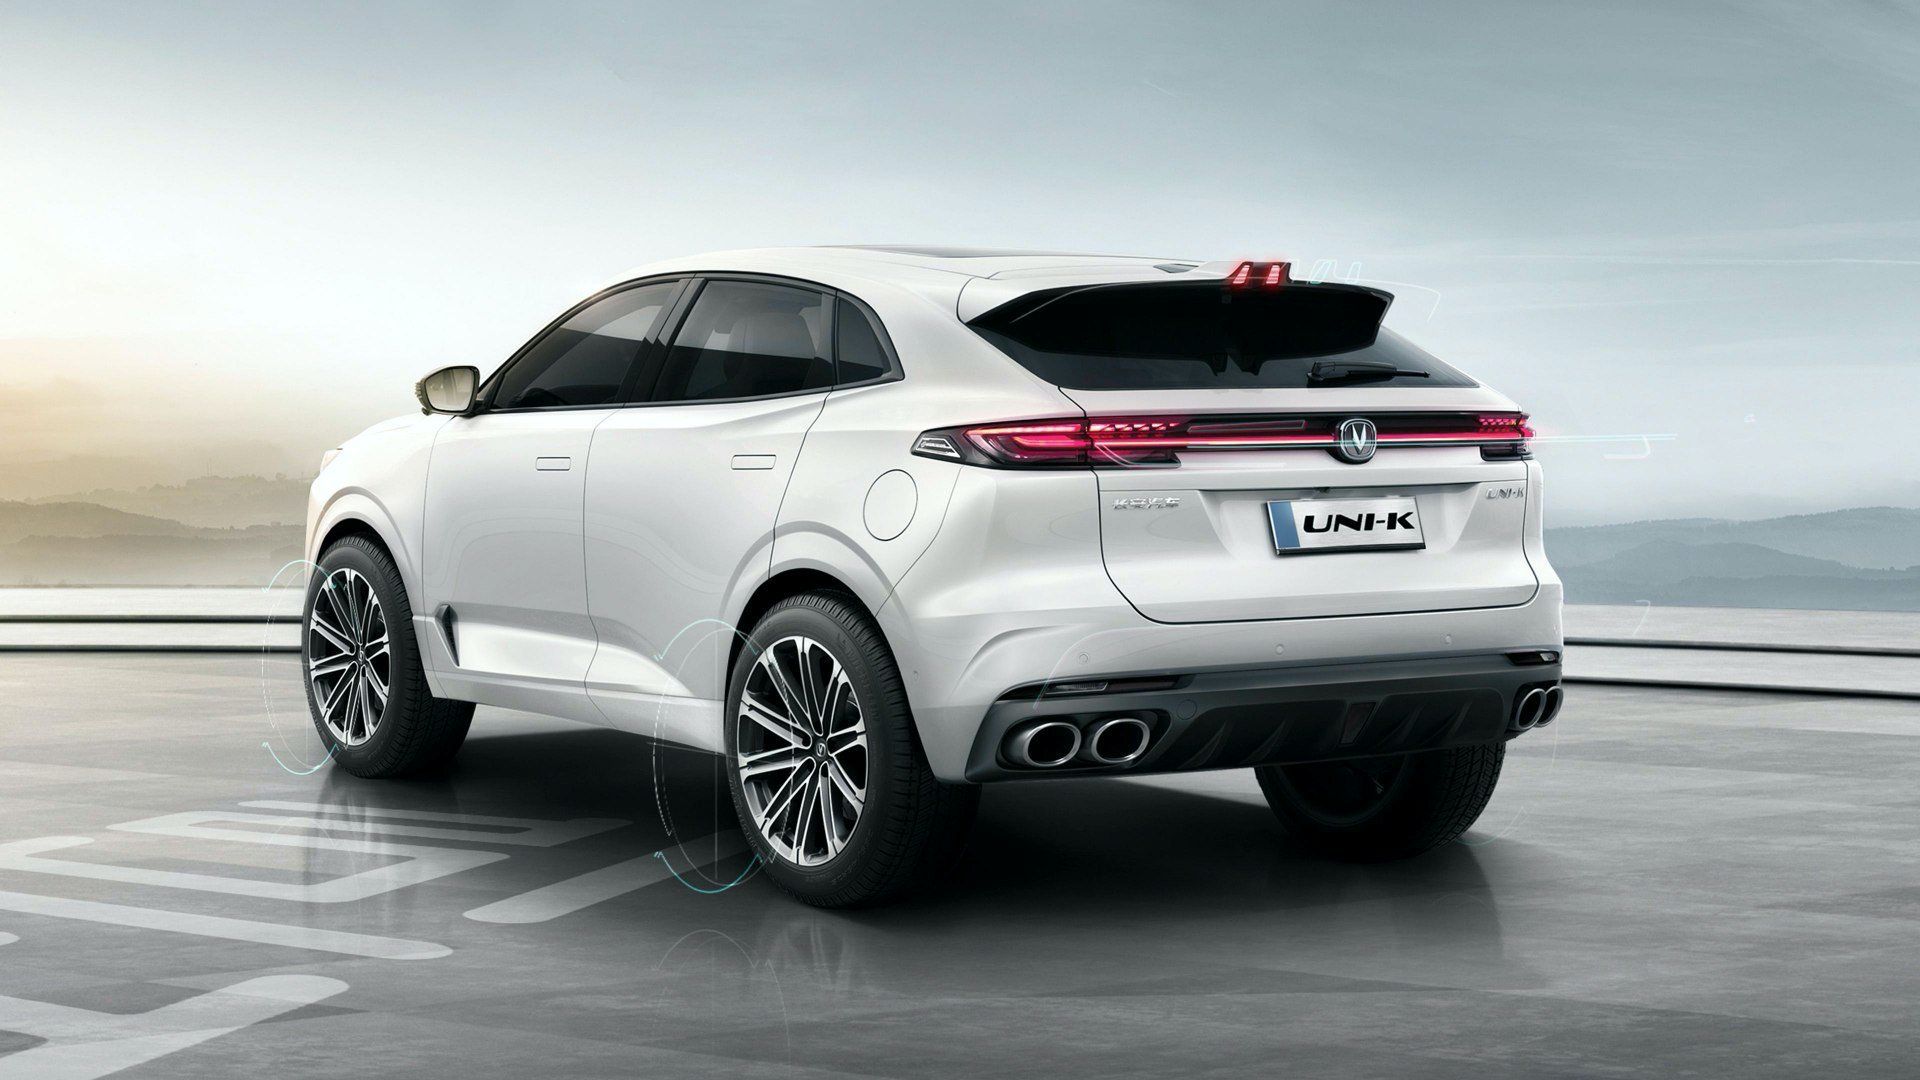 New Changan UniK Is The Poor Man's Porsche Cayenne Coupe Carscoops